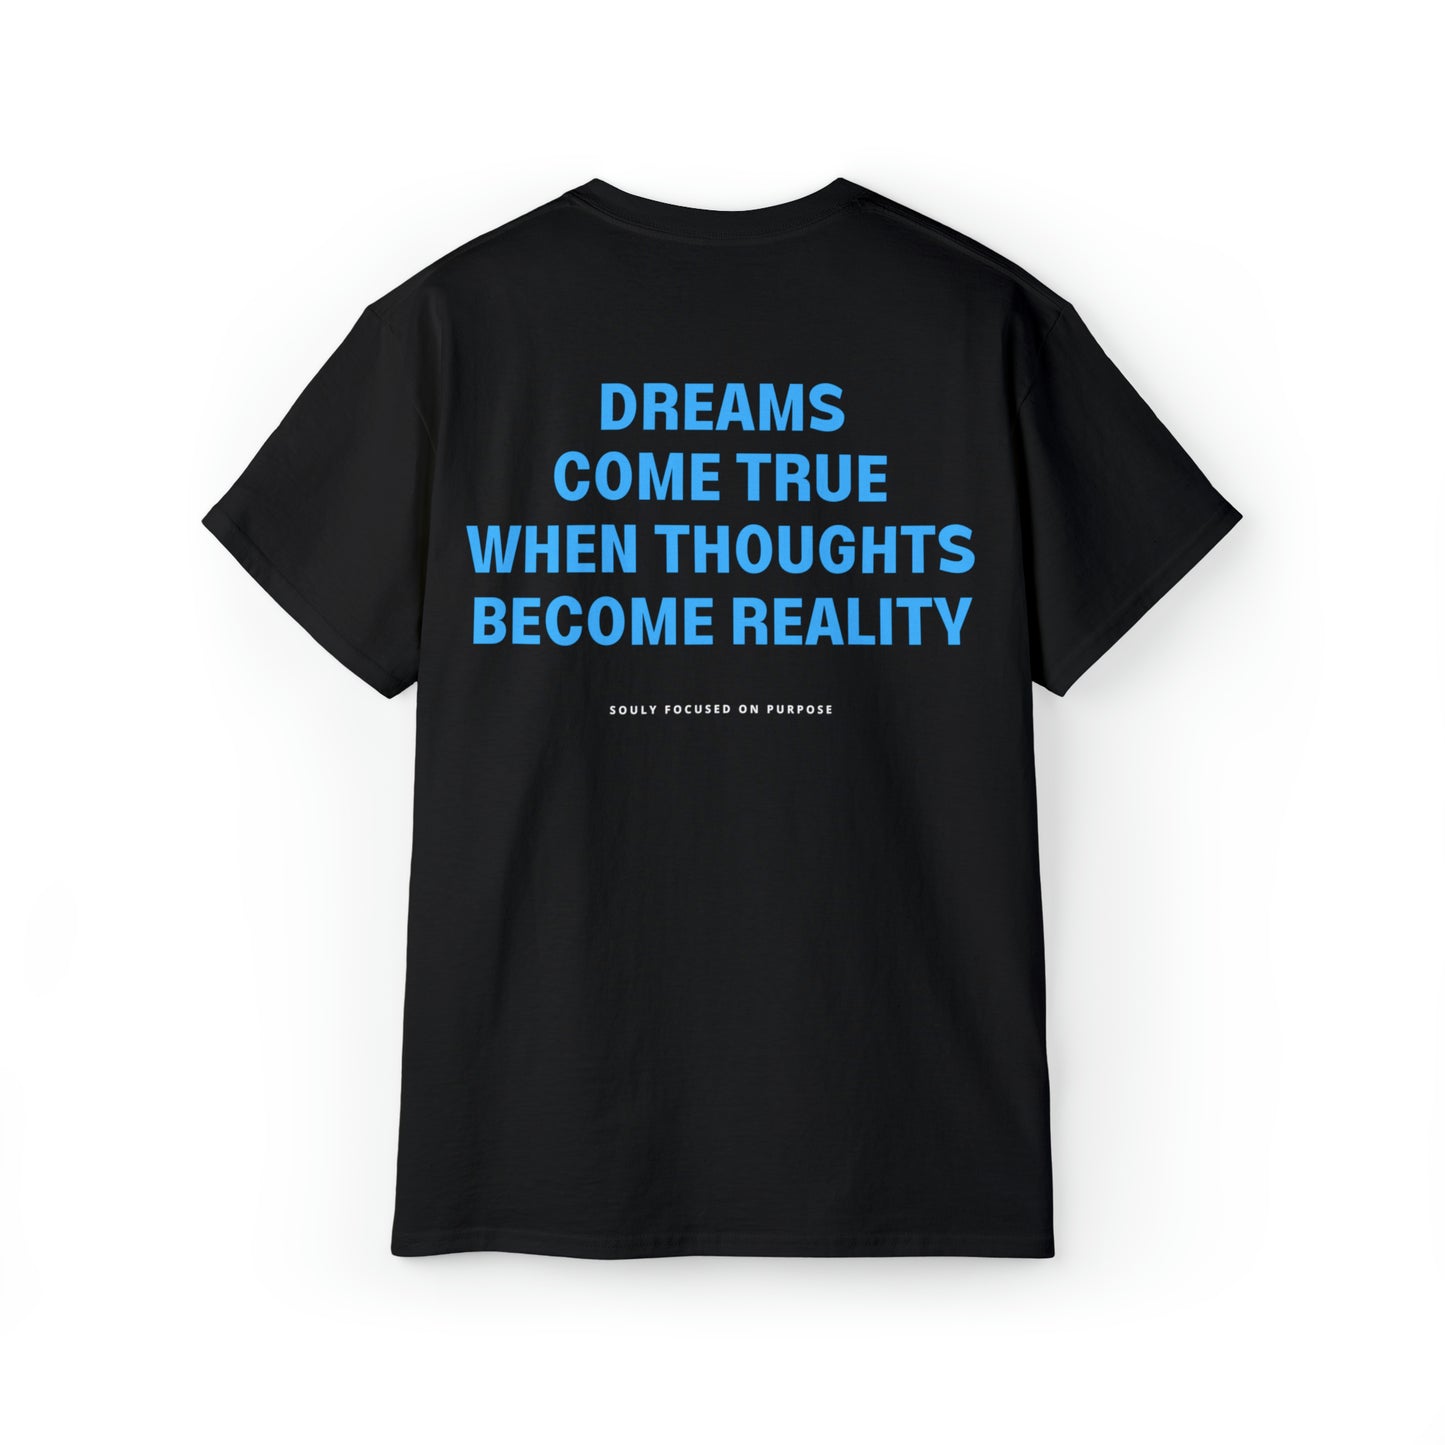 Dreams Come True When Thoughts Become Reality T-Shirt